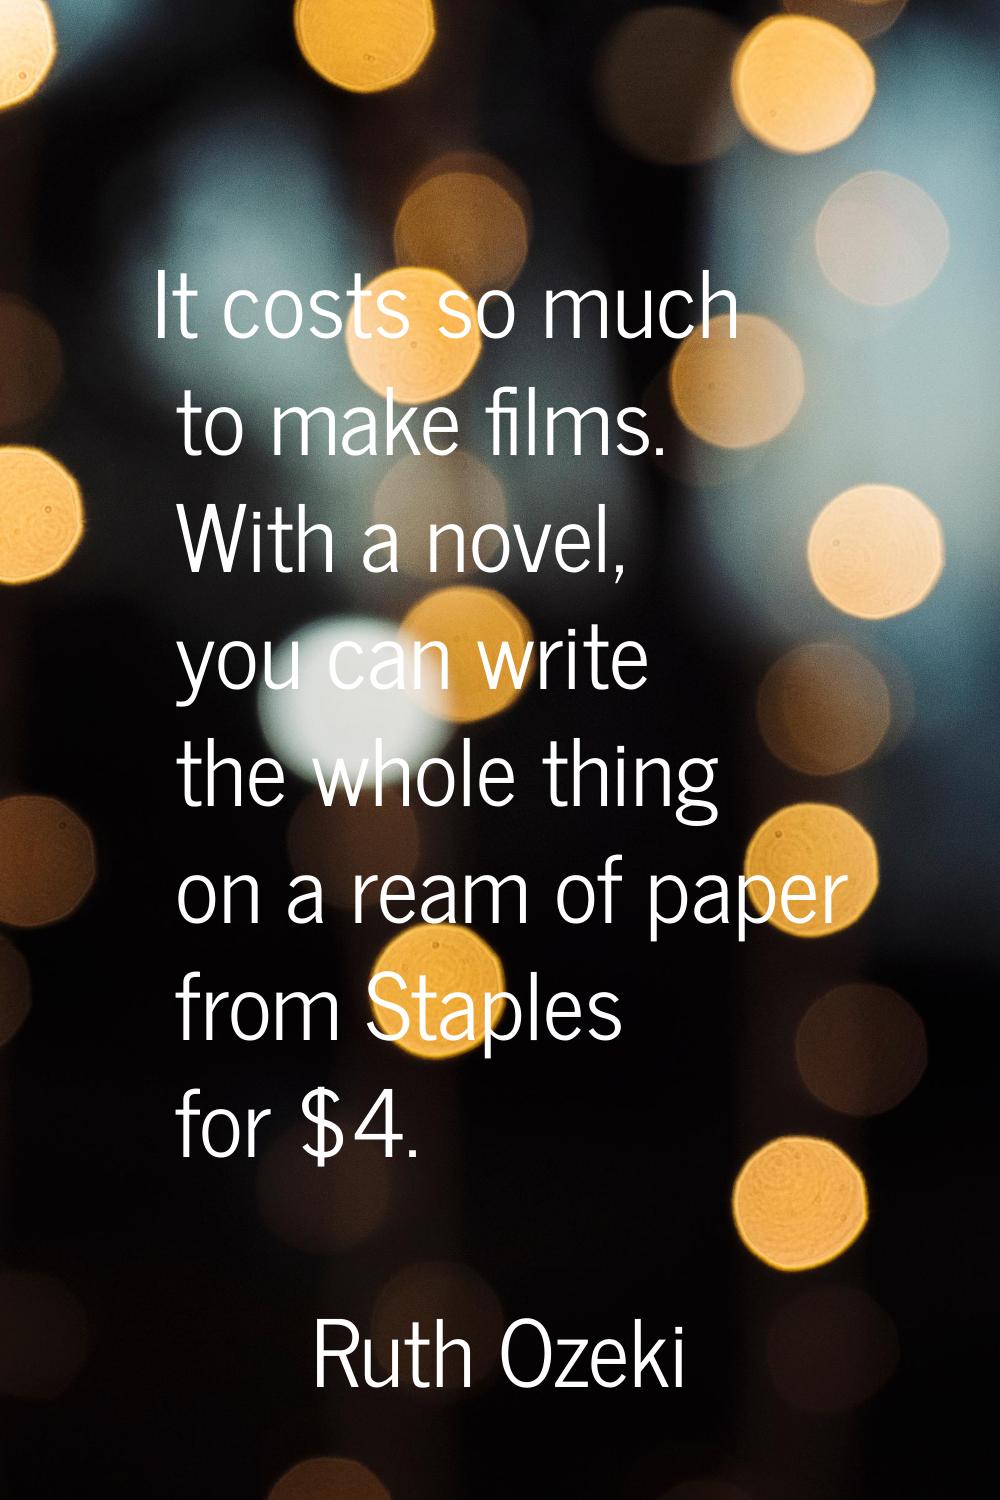 It costs so much to make films. With a novel, you can write the whole thing on a ream of paper from